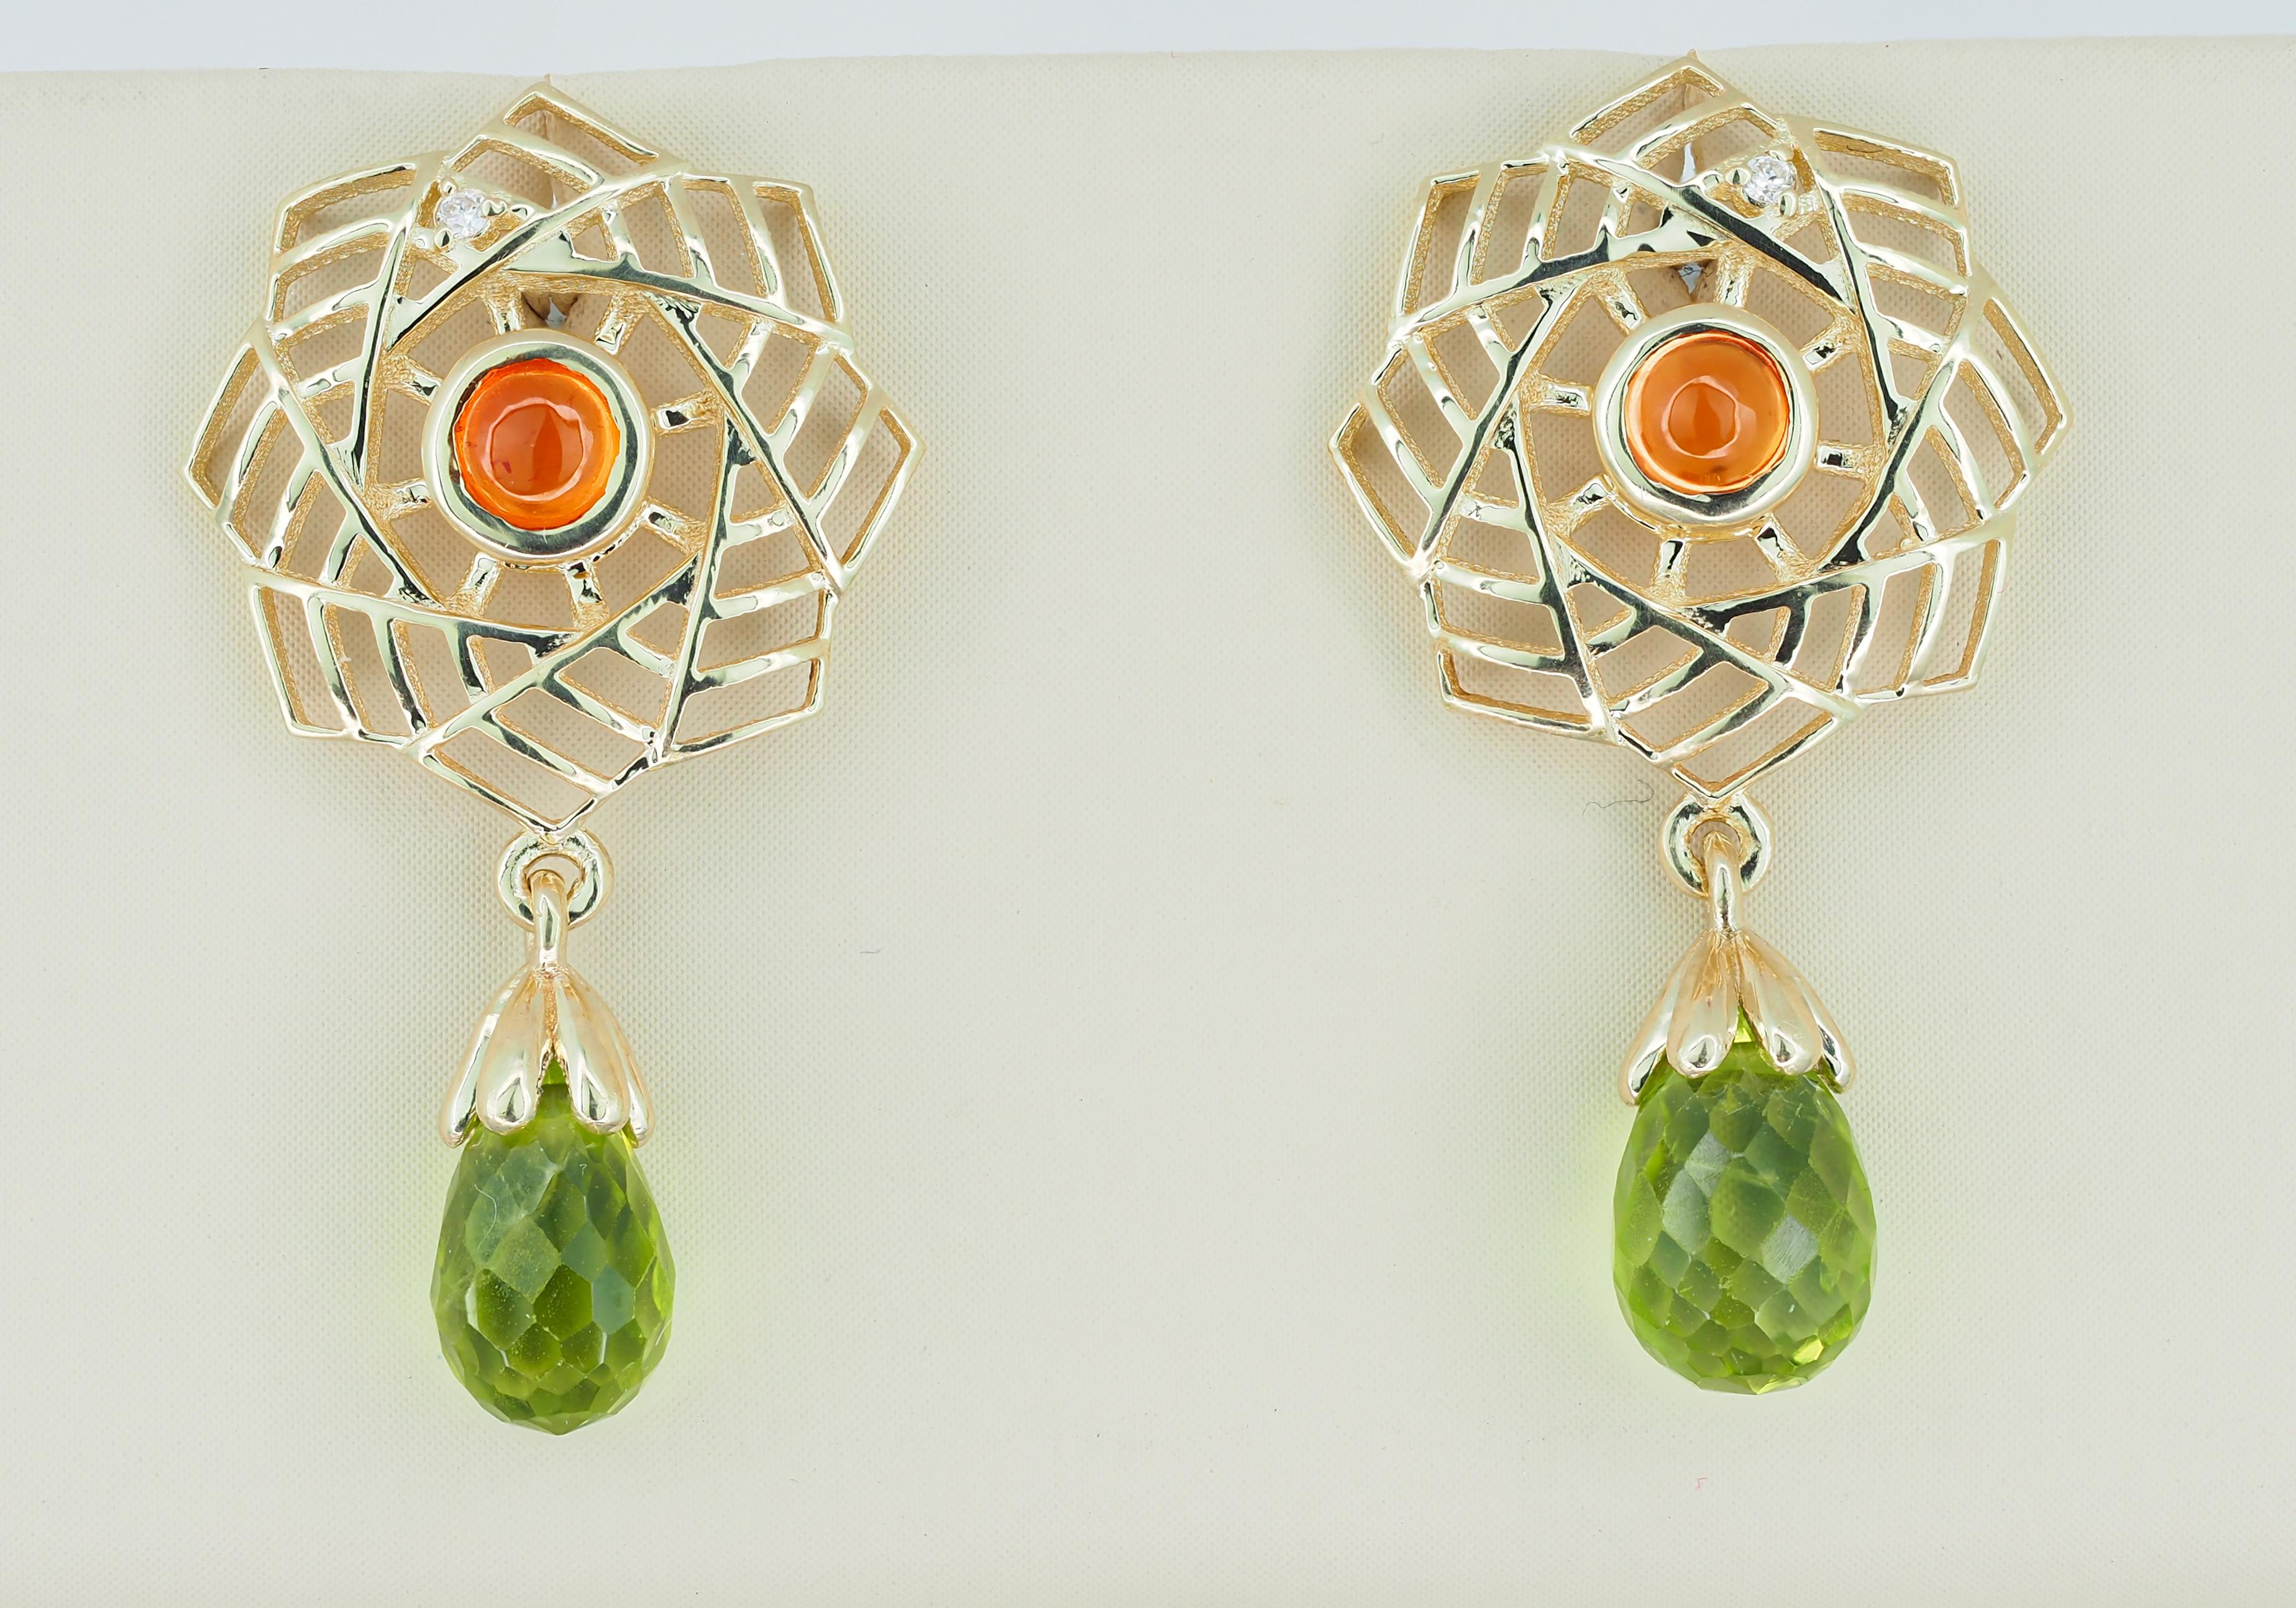 14k gold earrings with peridots, sapphires and diamonds. 
Peridot earrings in 14k gold. Yellow sapphire earrings in 14k gold.

Material: 14k gold
Weight: 2.60 g.
Earrings size: 25 x 14 mm.

Peridots:
2 pieces, green - color, briolette cut,